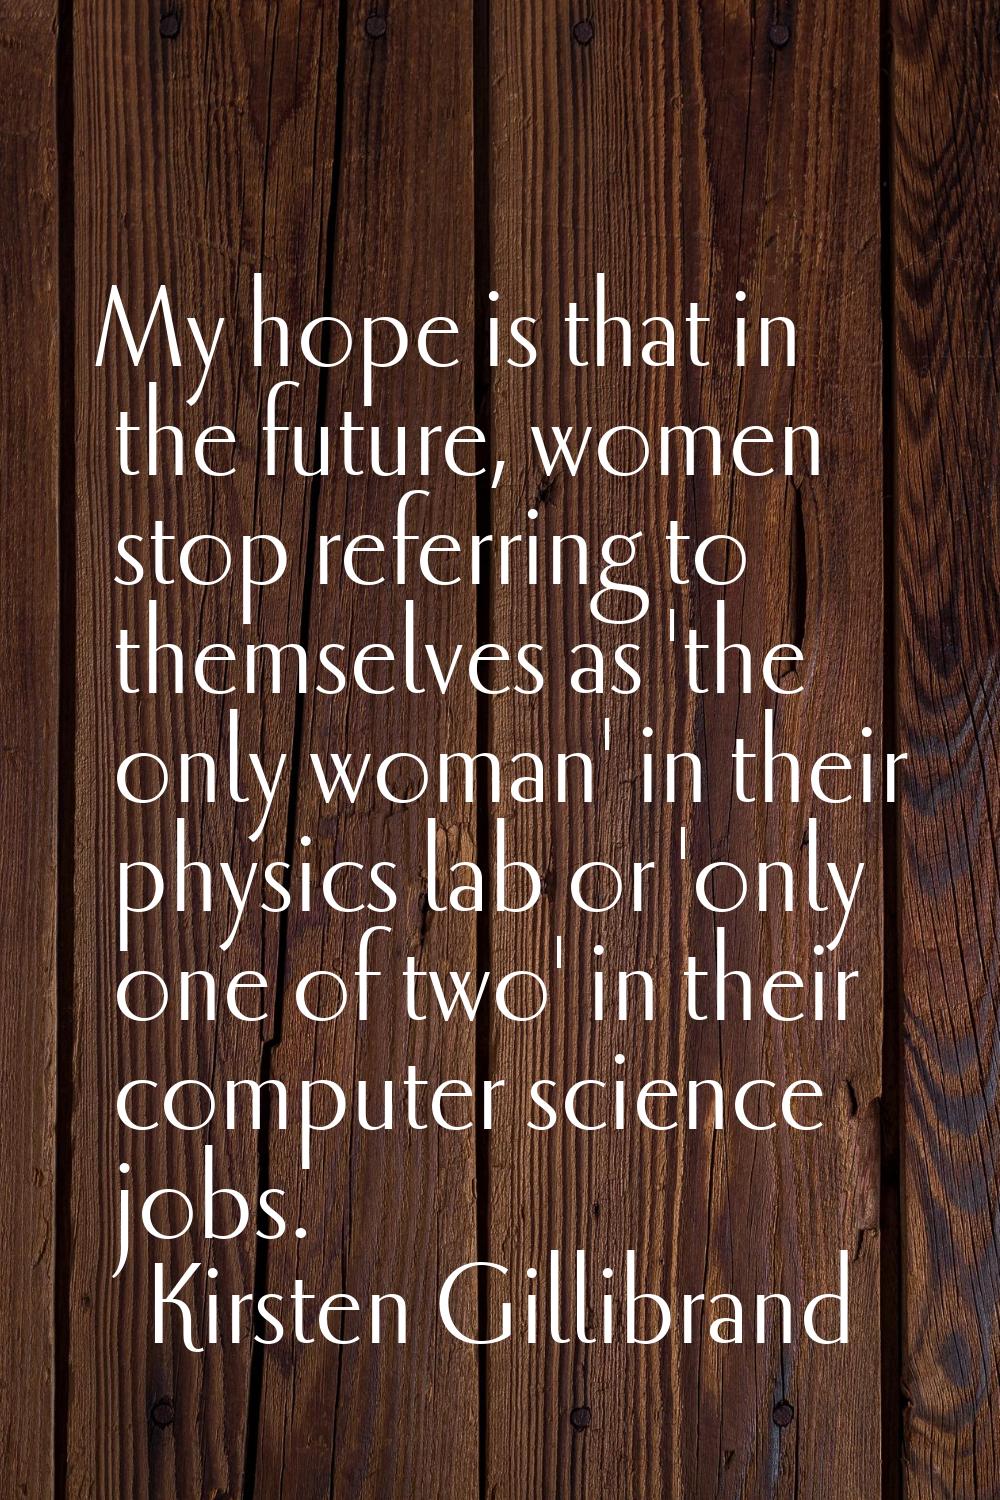 My hope is that in the future, women stop referring to themselves as 'the only woman' in their phys